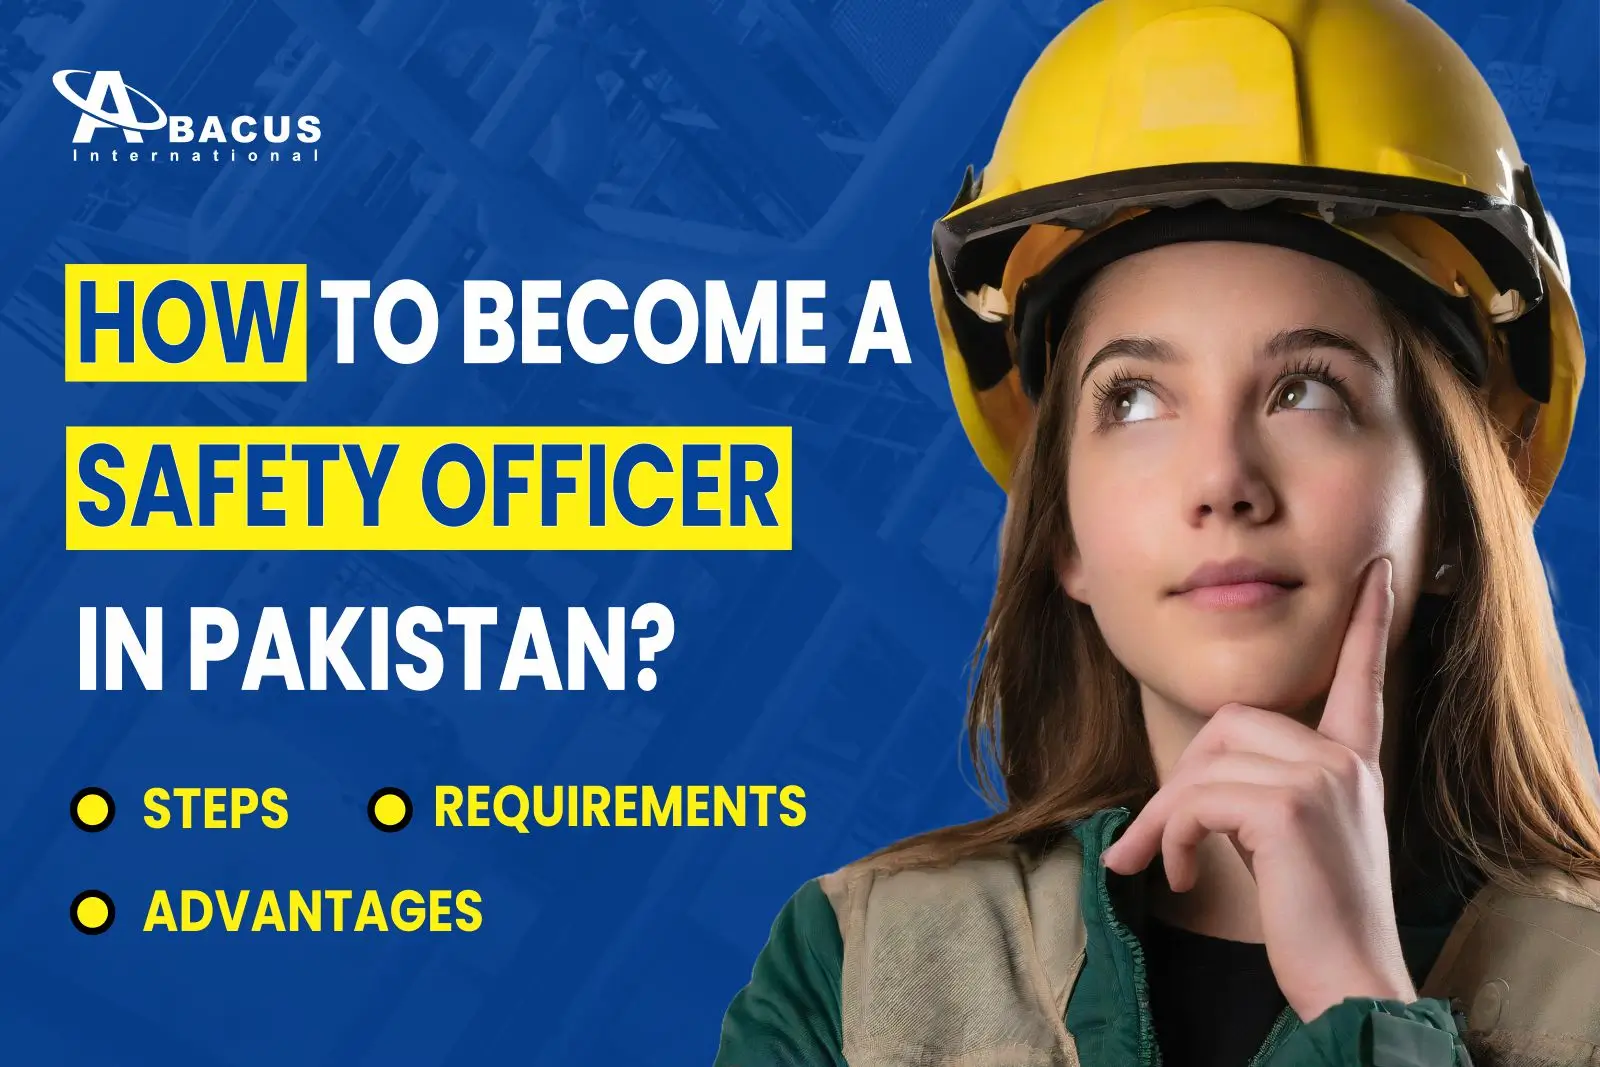 How to Become a Safety Officer in Pakistan